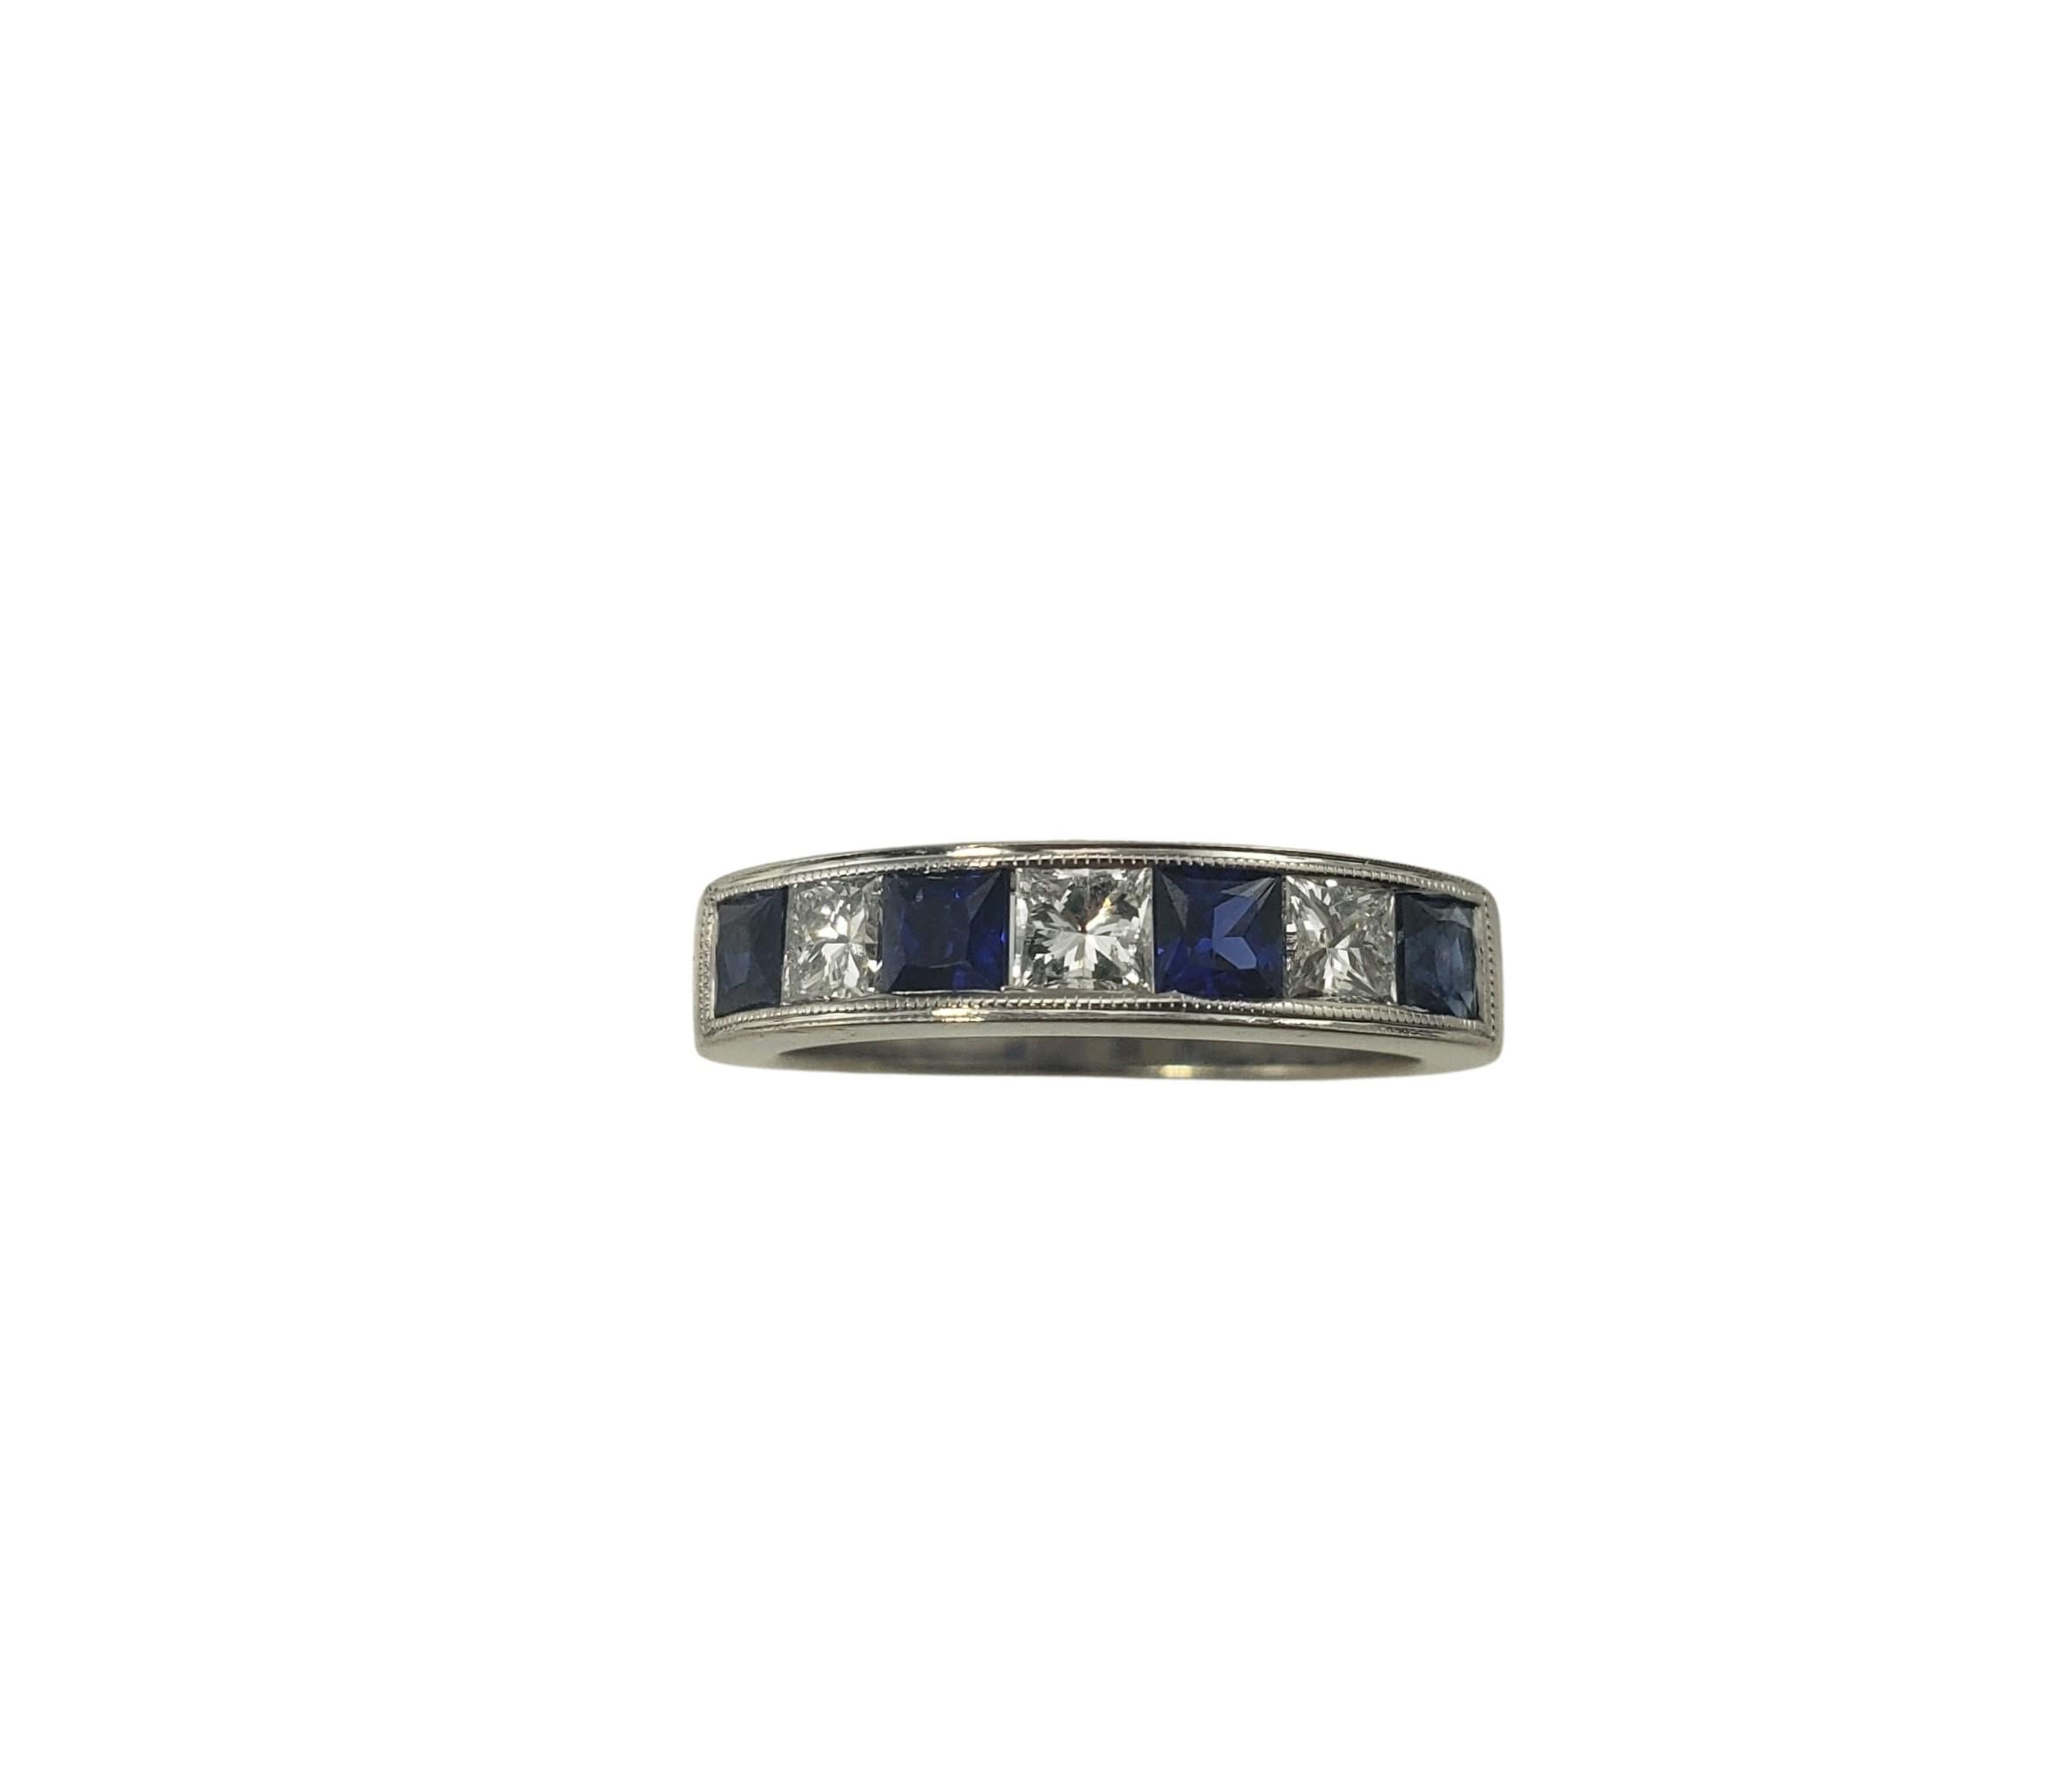 Vintage 18 Karat White Gold Natural Sapphire and Diamond Ring Size 6-

This sparkling band features three princess cut diamonds and four princess cut sapphires set in classic 18K white gold.  4 mm.
Shank:  3 mm.

Approximate total diamond weight: 